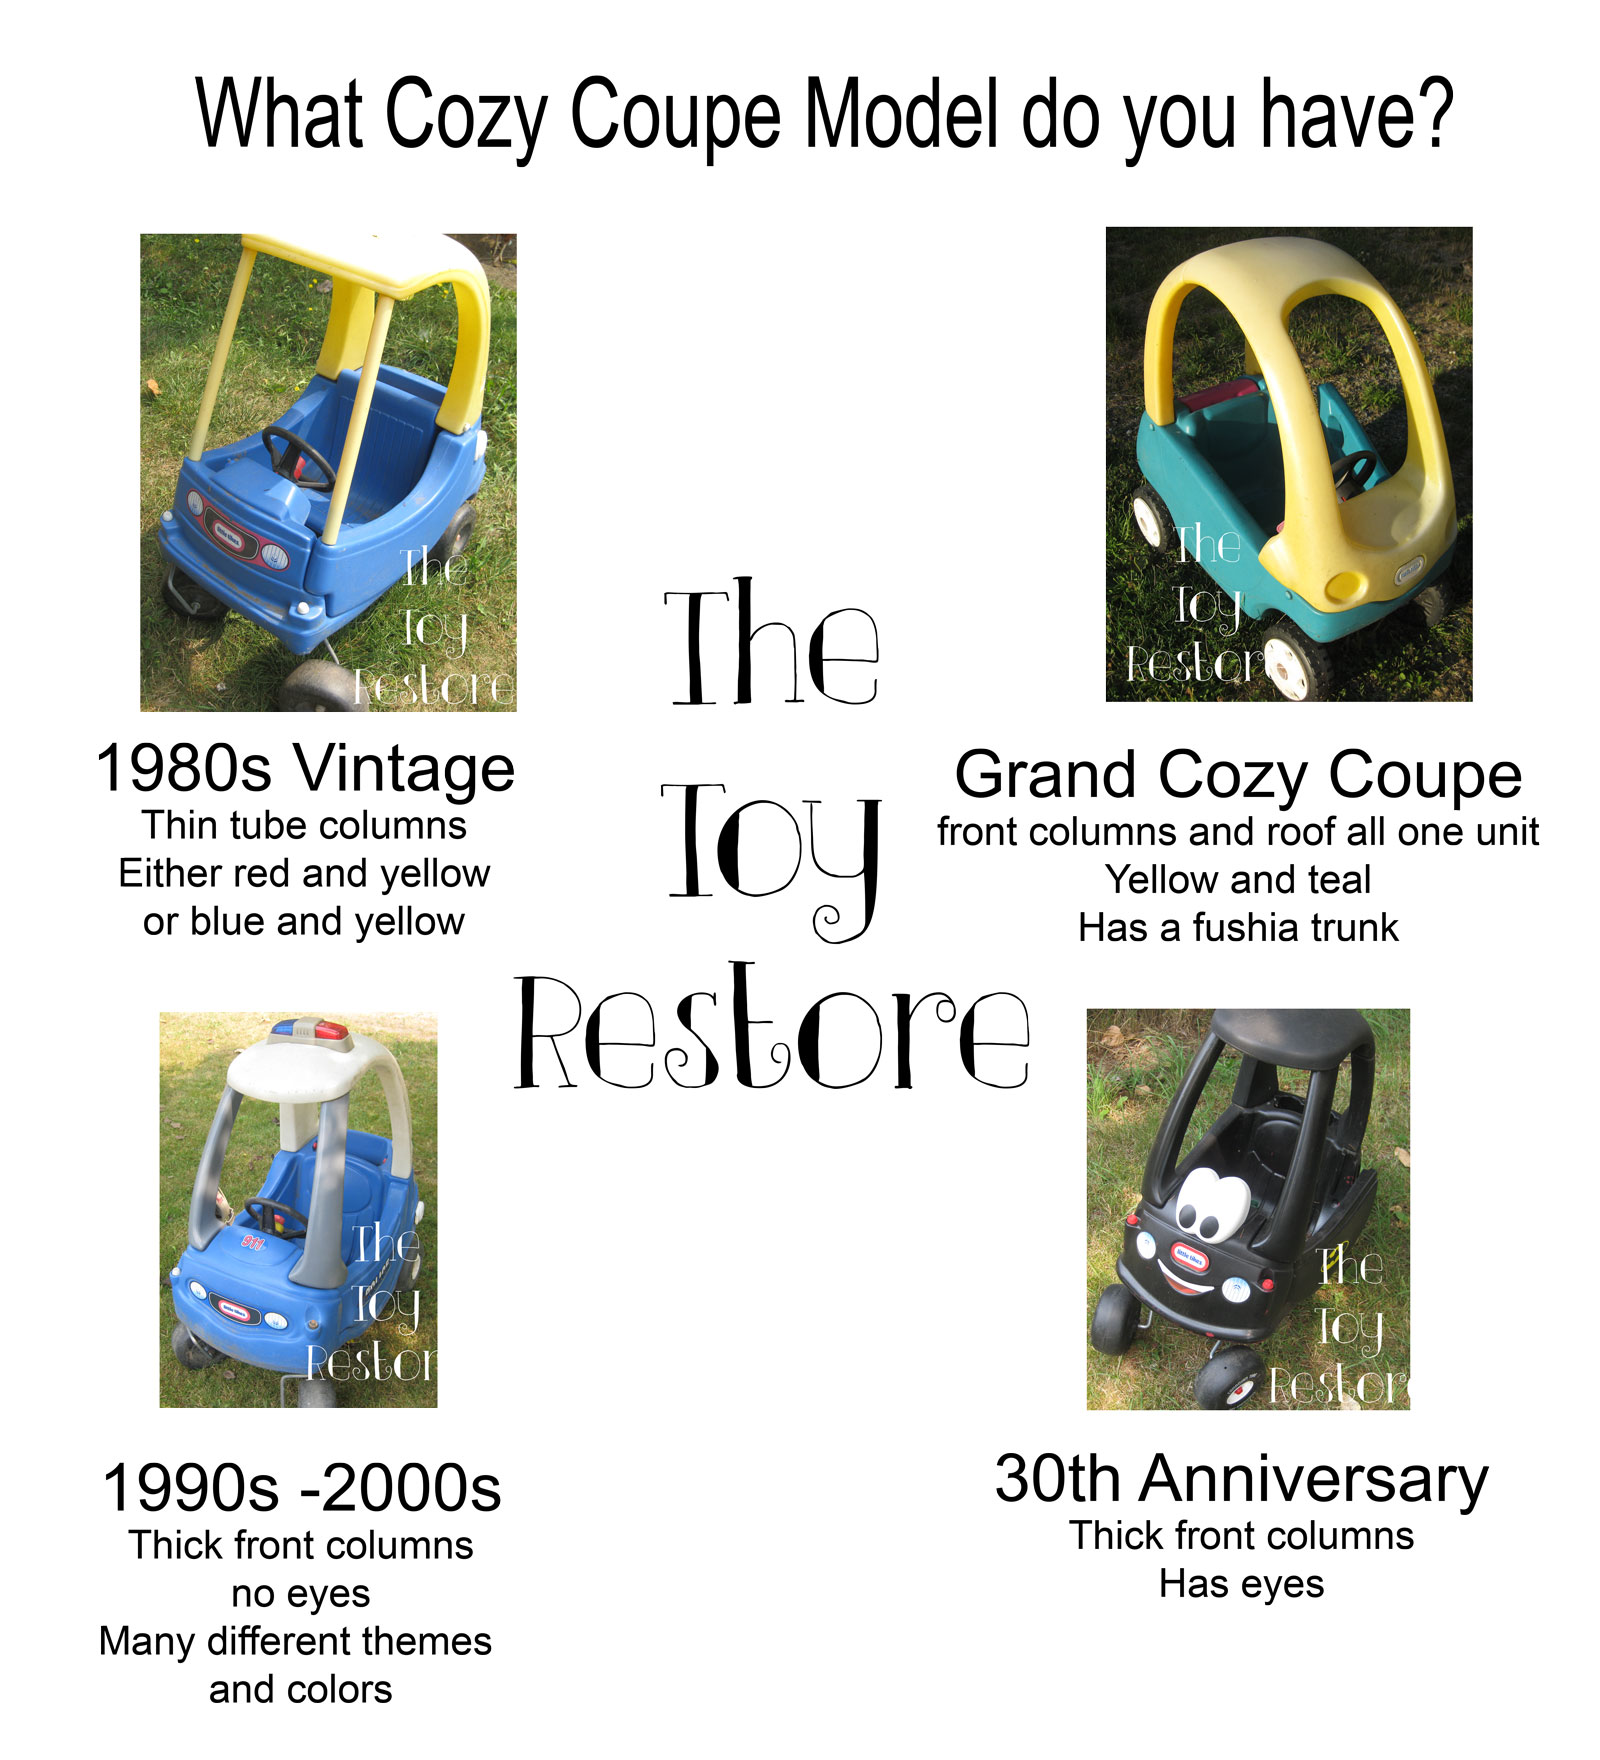 What Model of Little Tikes Cozy Coupe do you have?